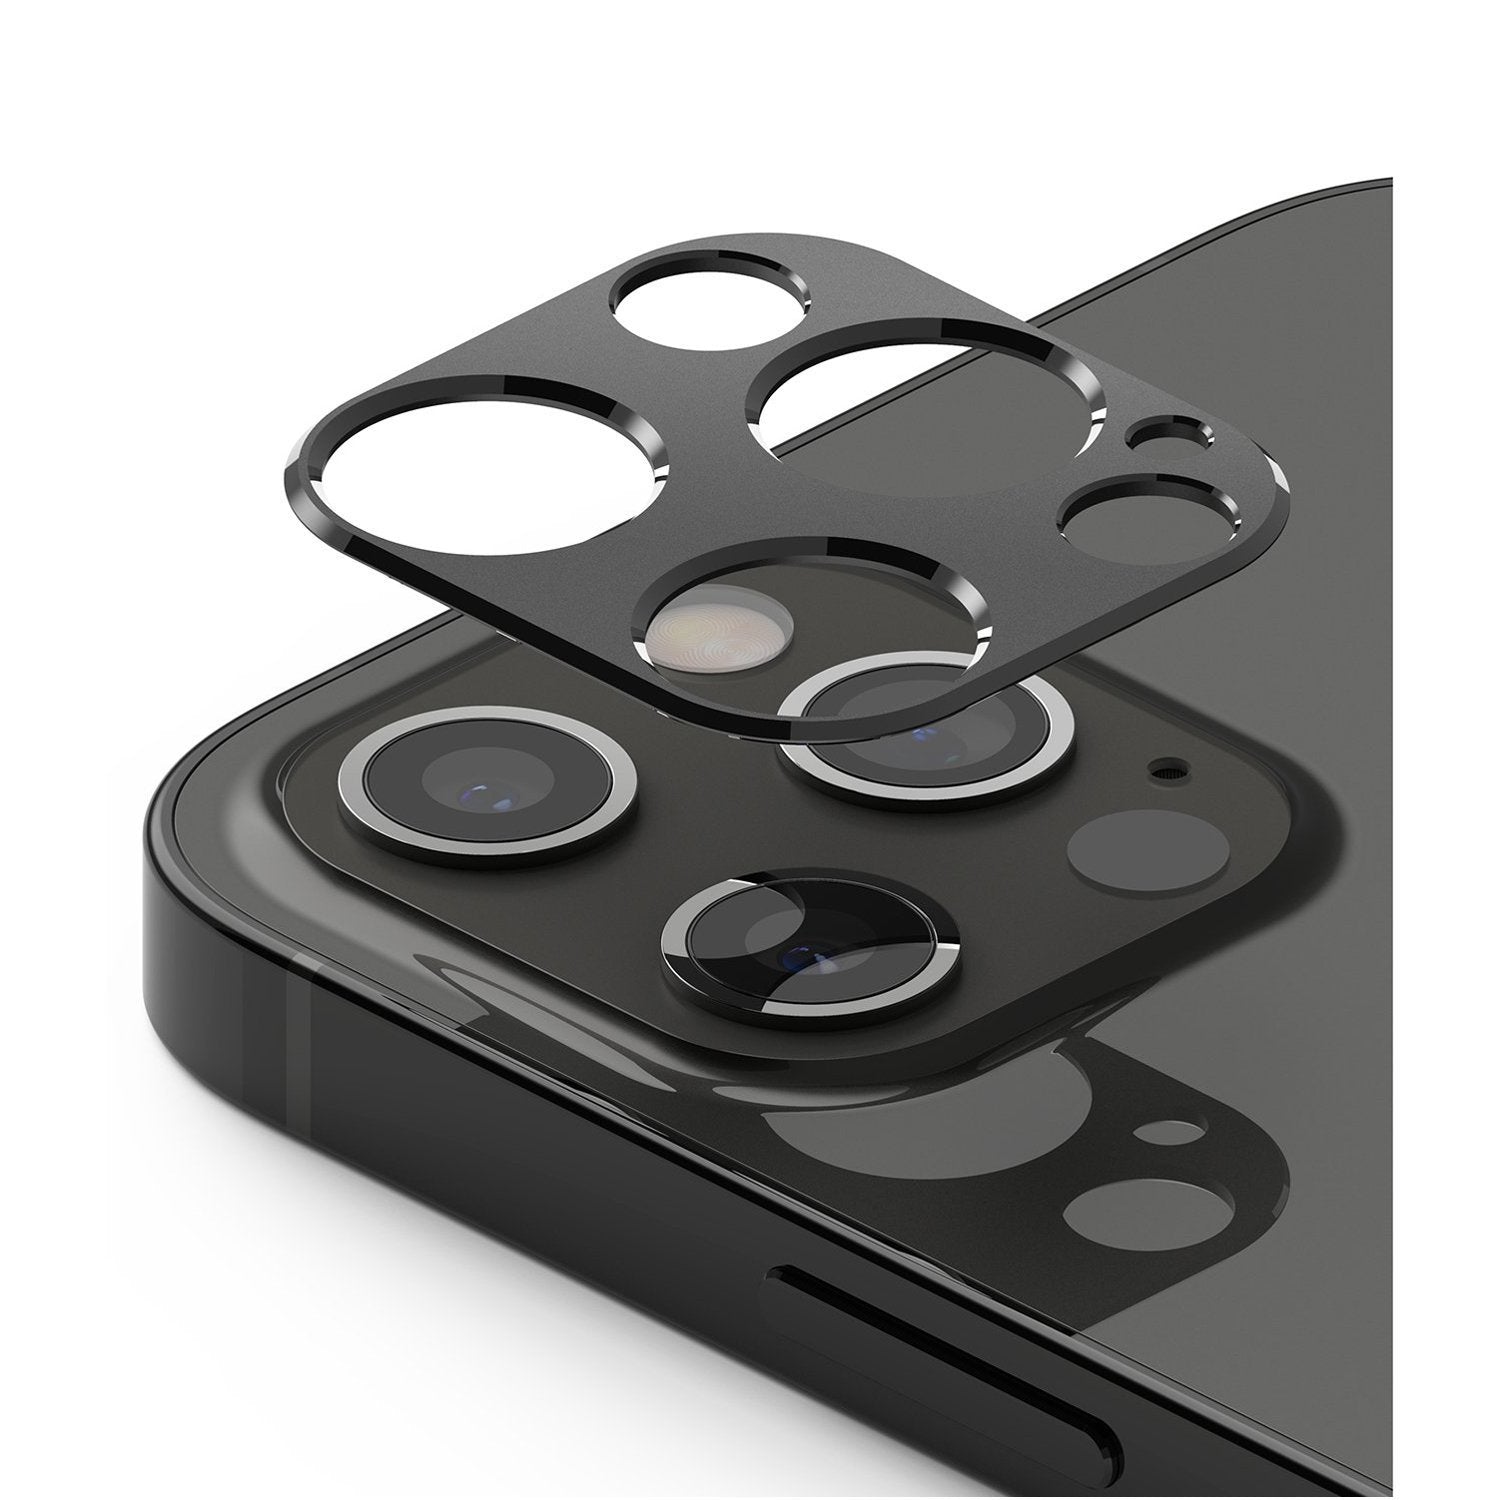 Ringke Camera Styling for iPhone 12 Pro 6.1", Gray Default Ringke 